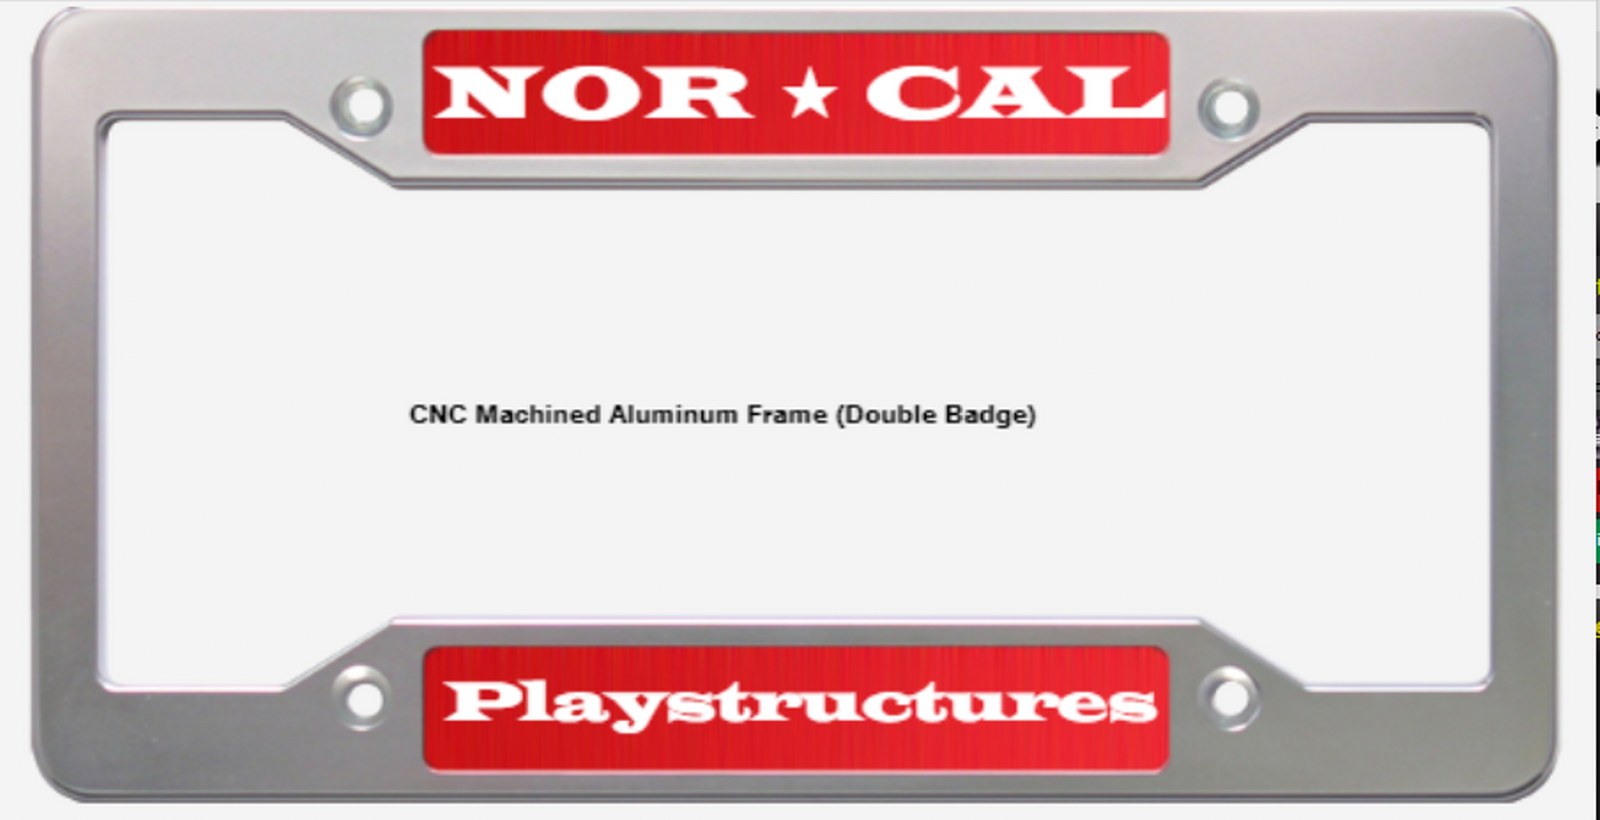 Nor Cal Playstructures - CNC Machined License Plate Frame ref #35375